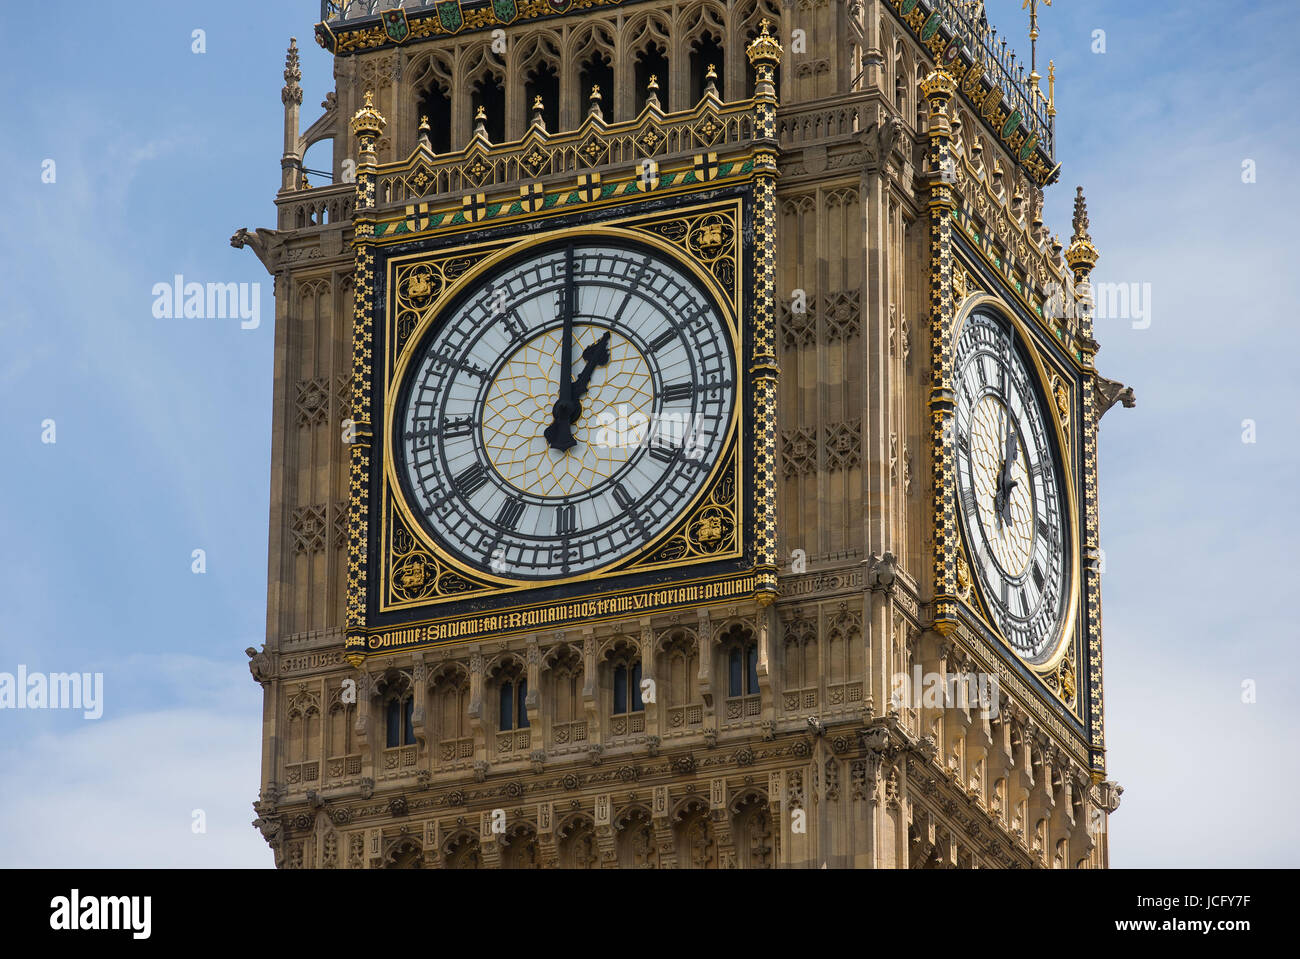 The clock face at the Elizabeth Tower, home to the bell Big Ben ...